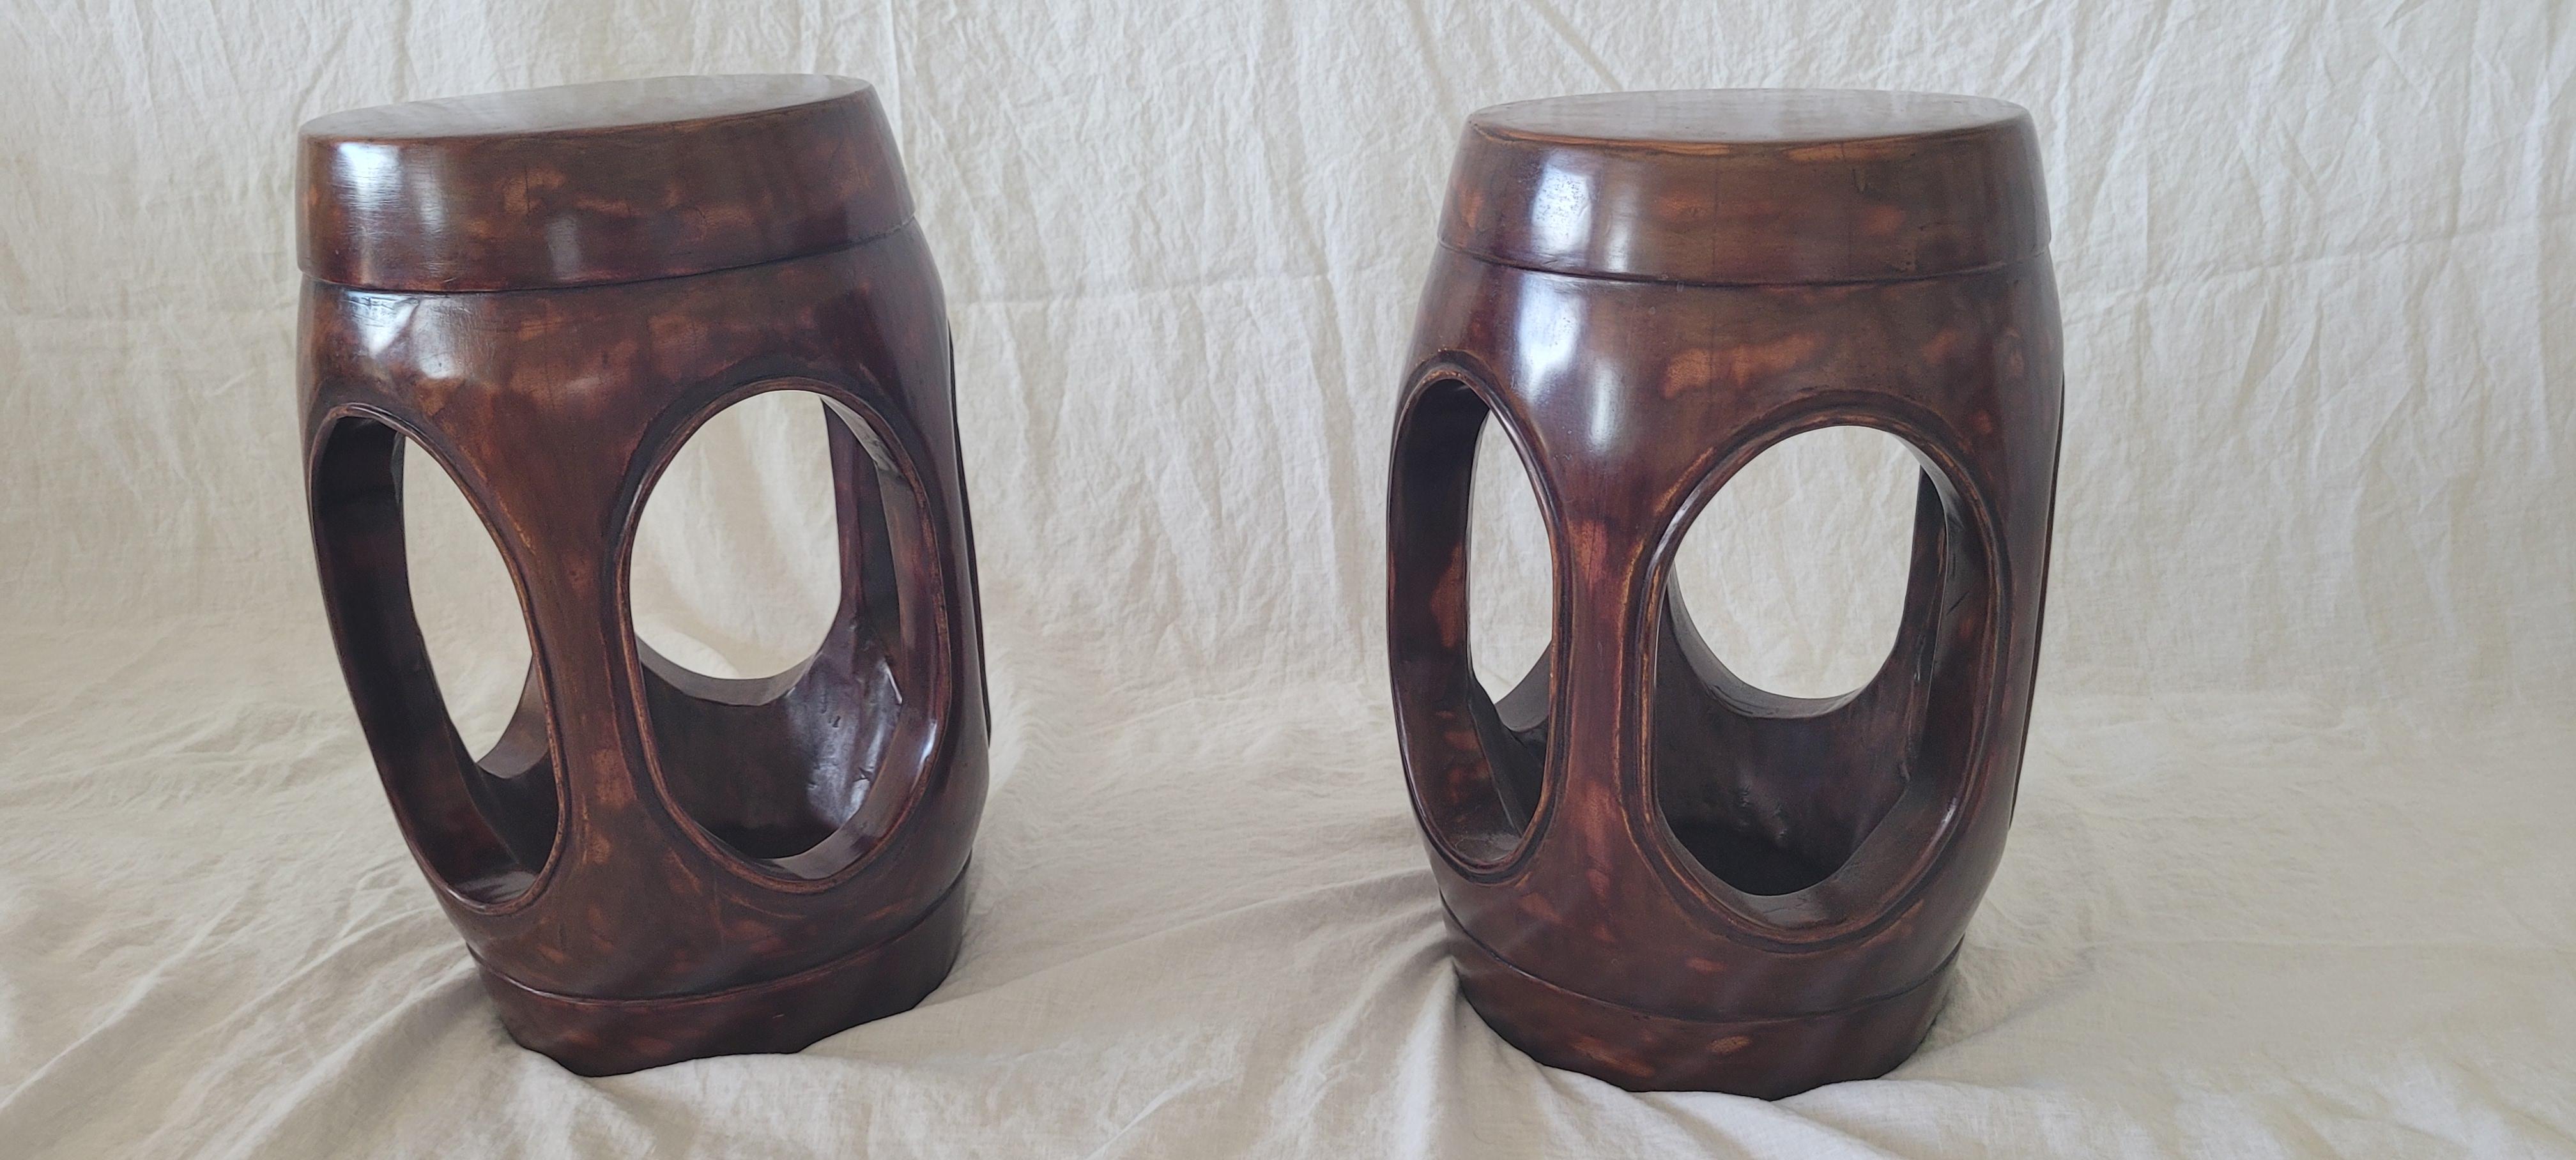 21st Century Lacquer Drum Stools In Good Condition For Sale In Santa Monica, CA